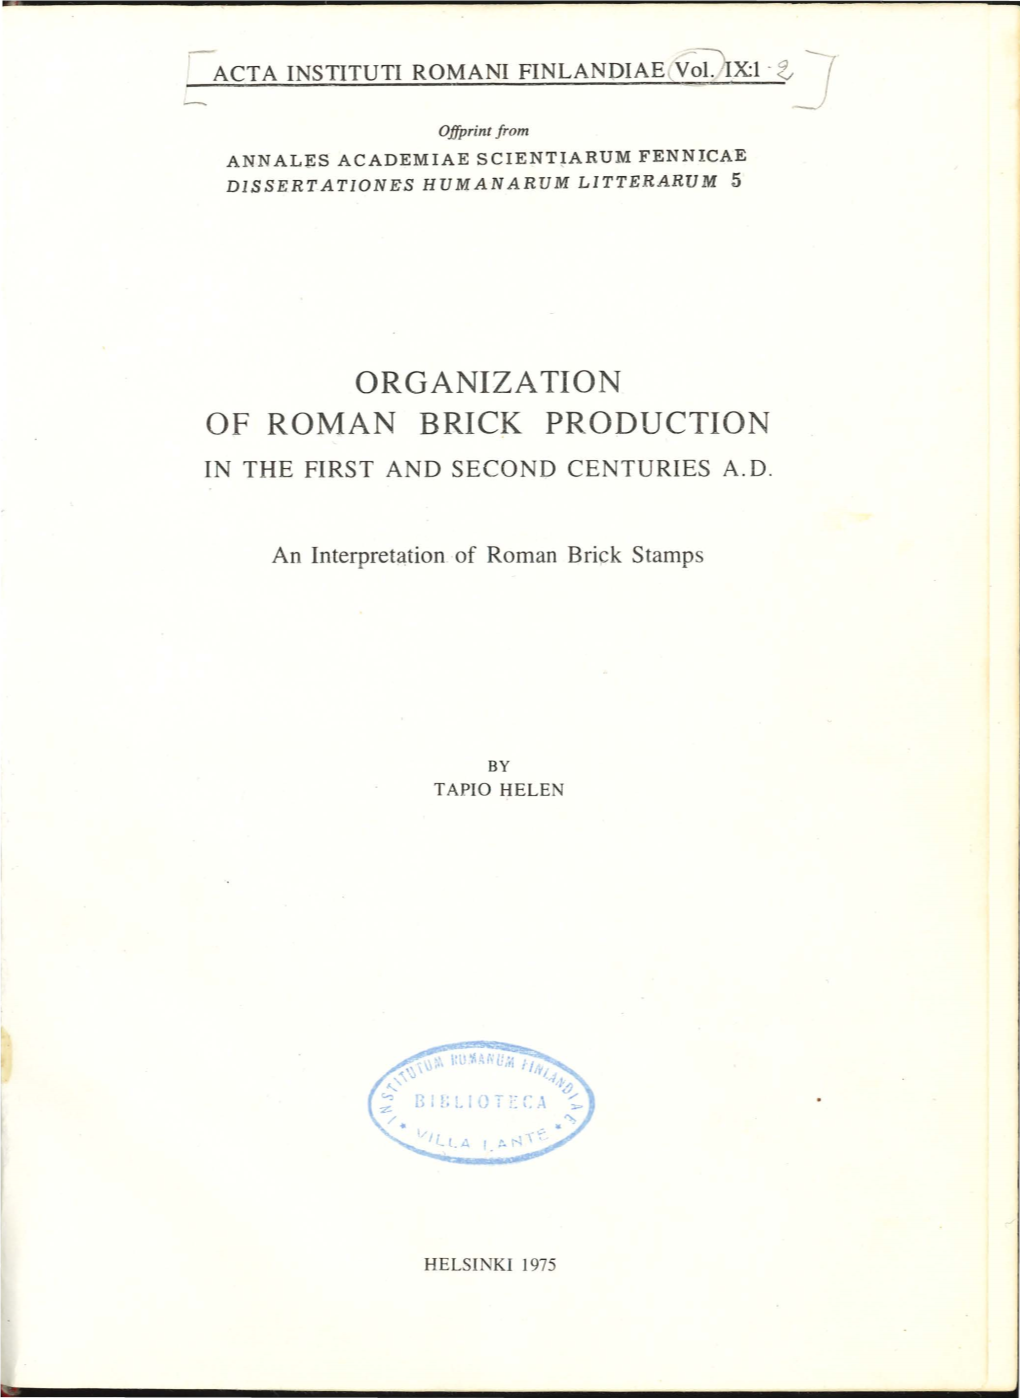 Organization of Roman Brick Production in the First and Second Centuries A